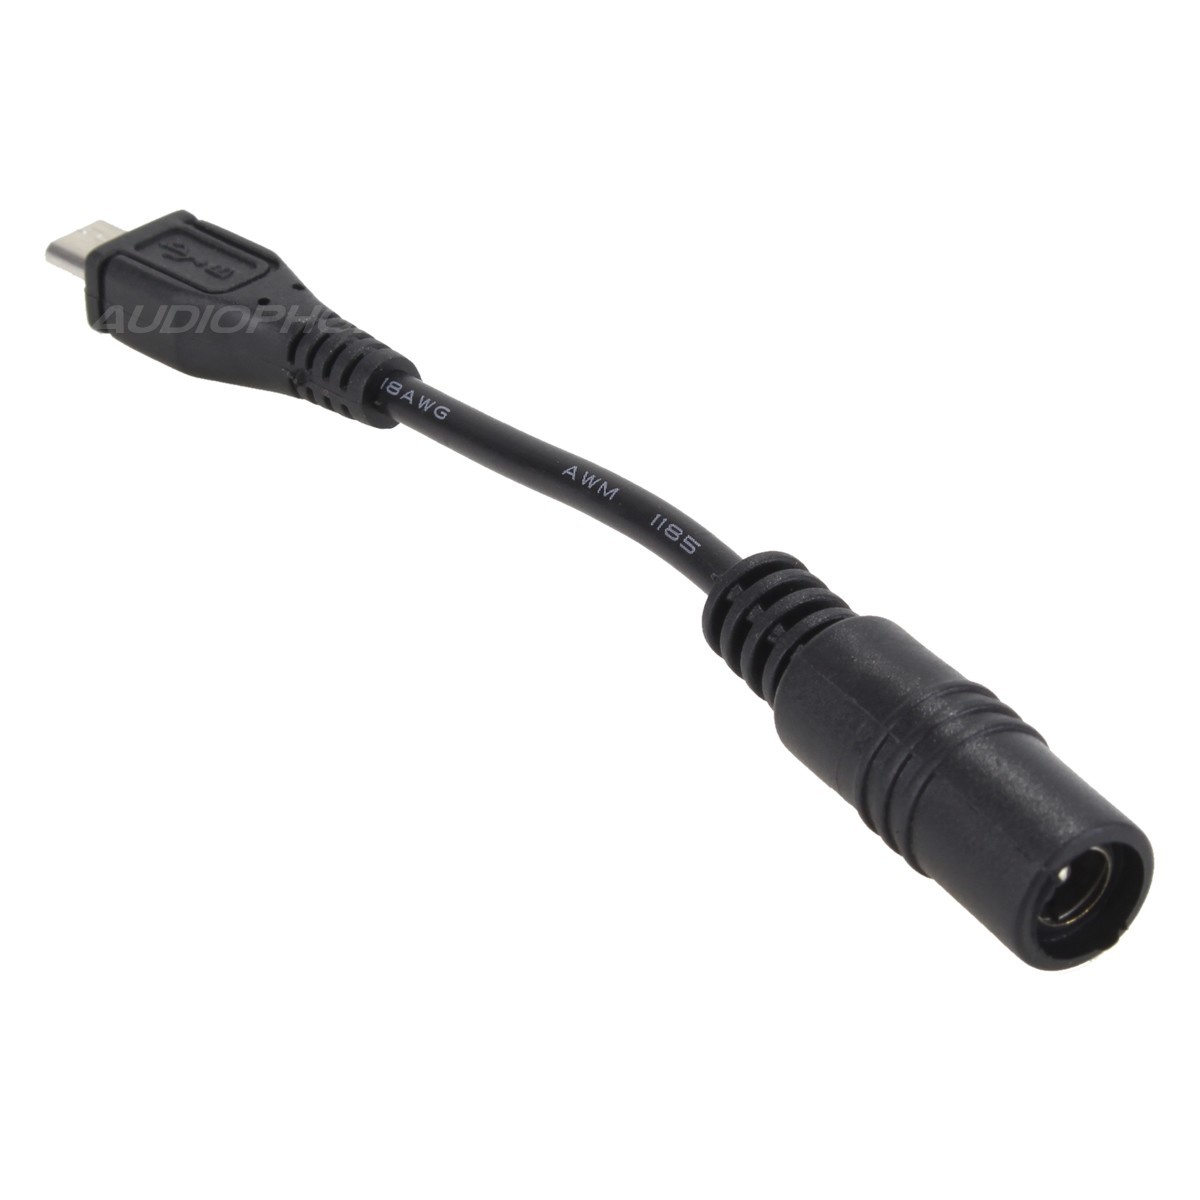 5.5x2.1mm Female to Micro USB Male Barrel Adapter Charging Cable Connector JH 